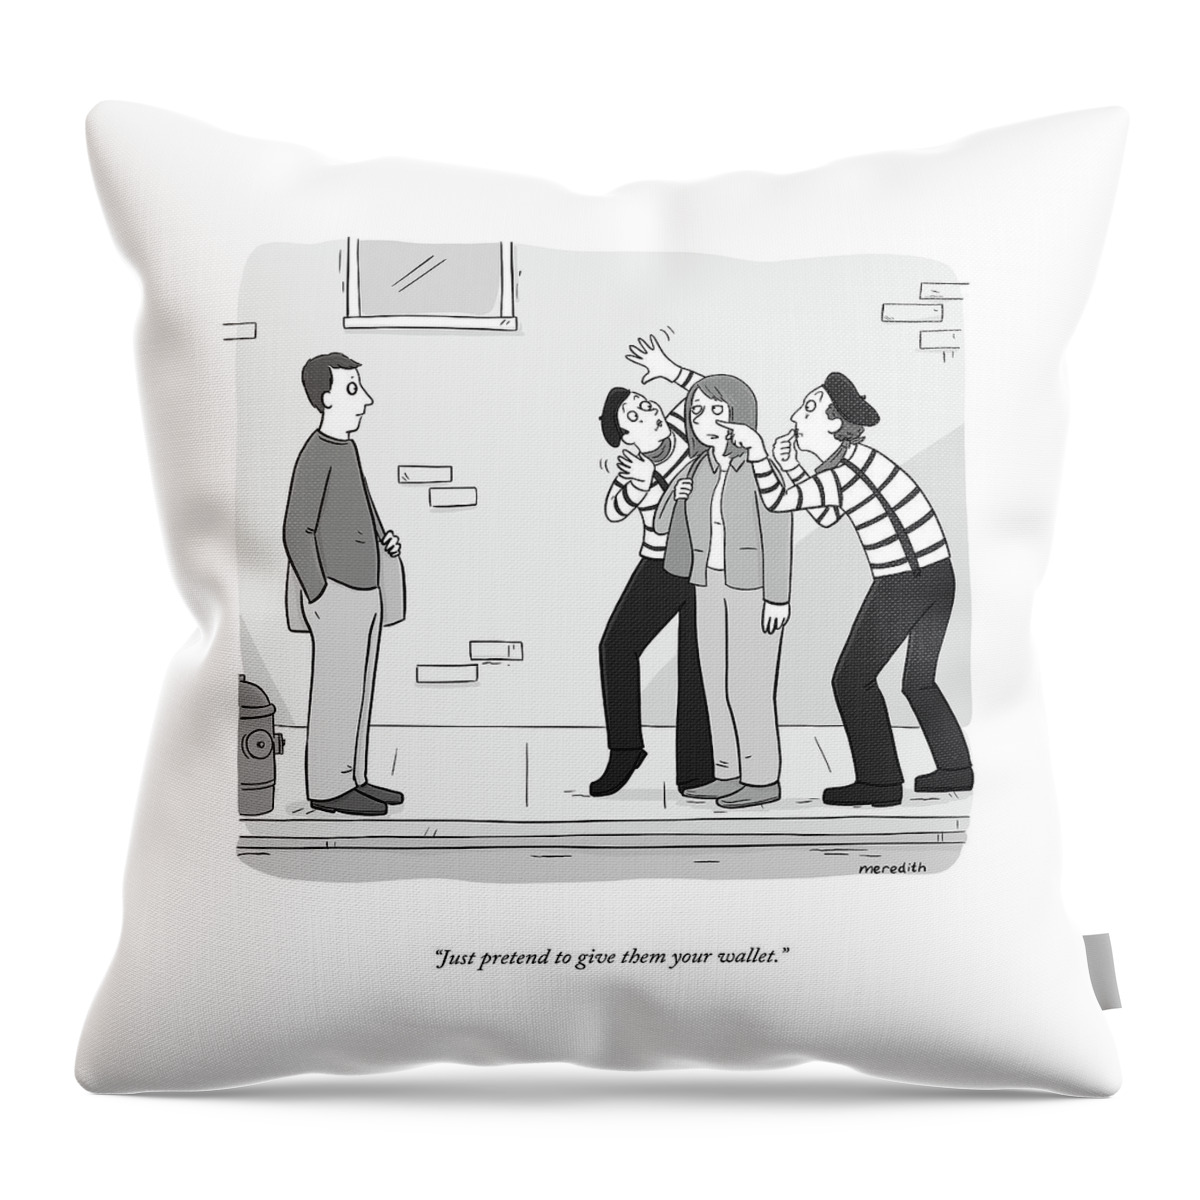 Pretend To Give Them Your Wallet Throw Pillow